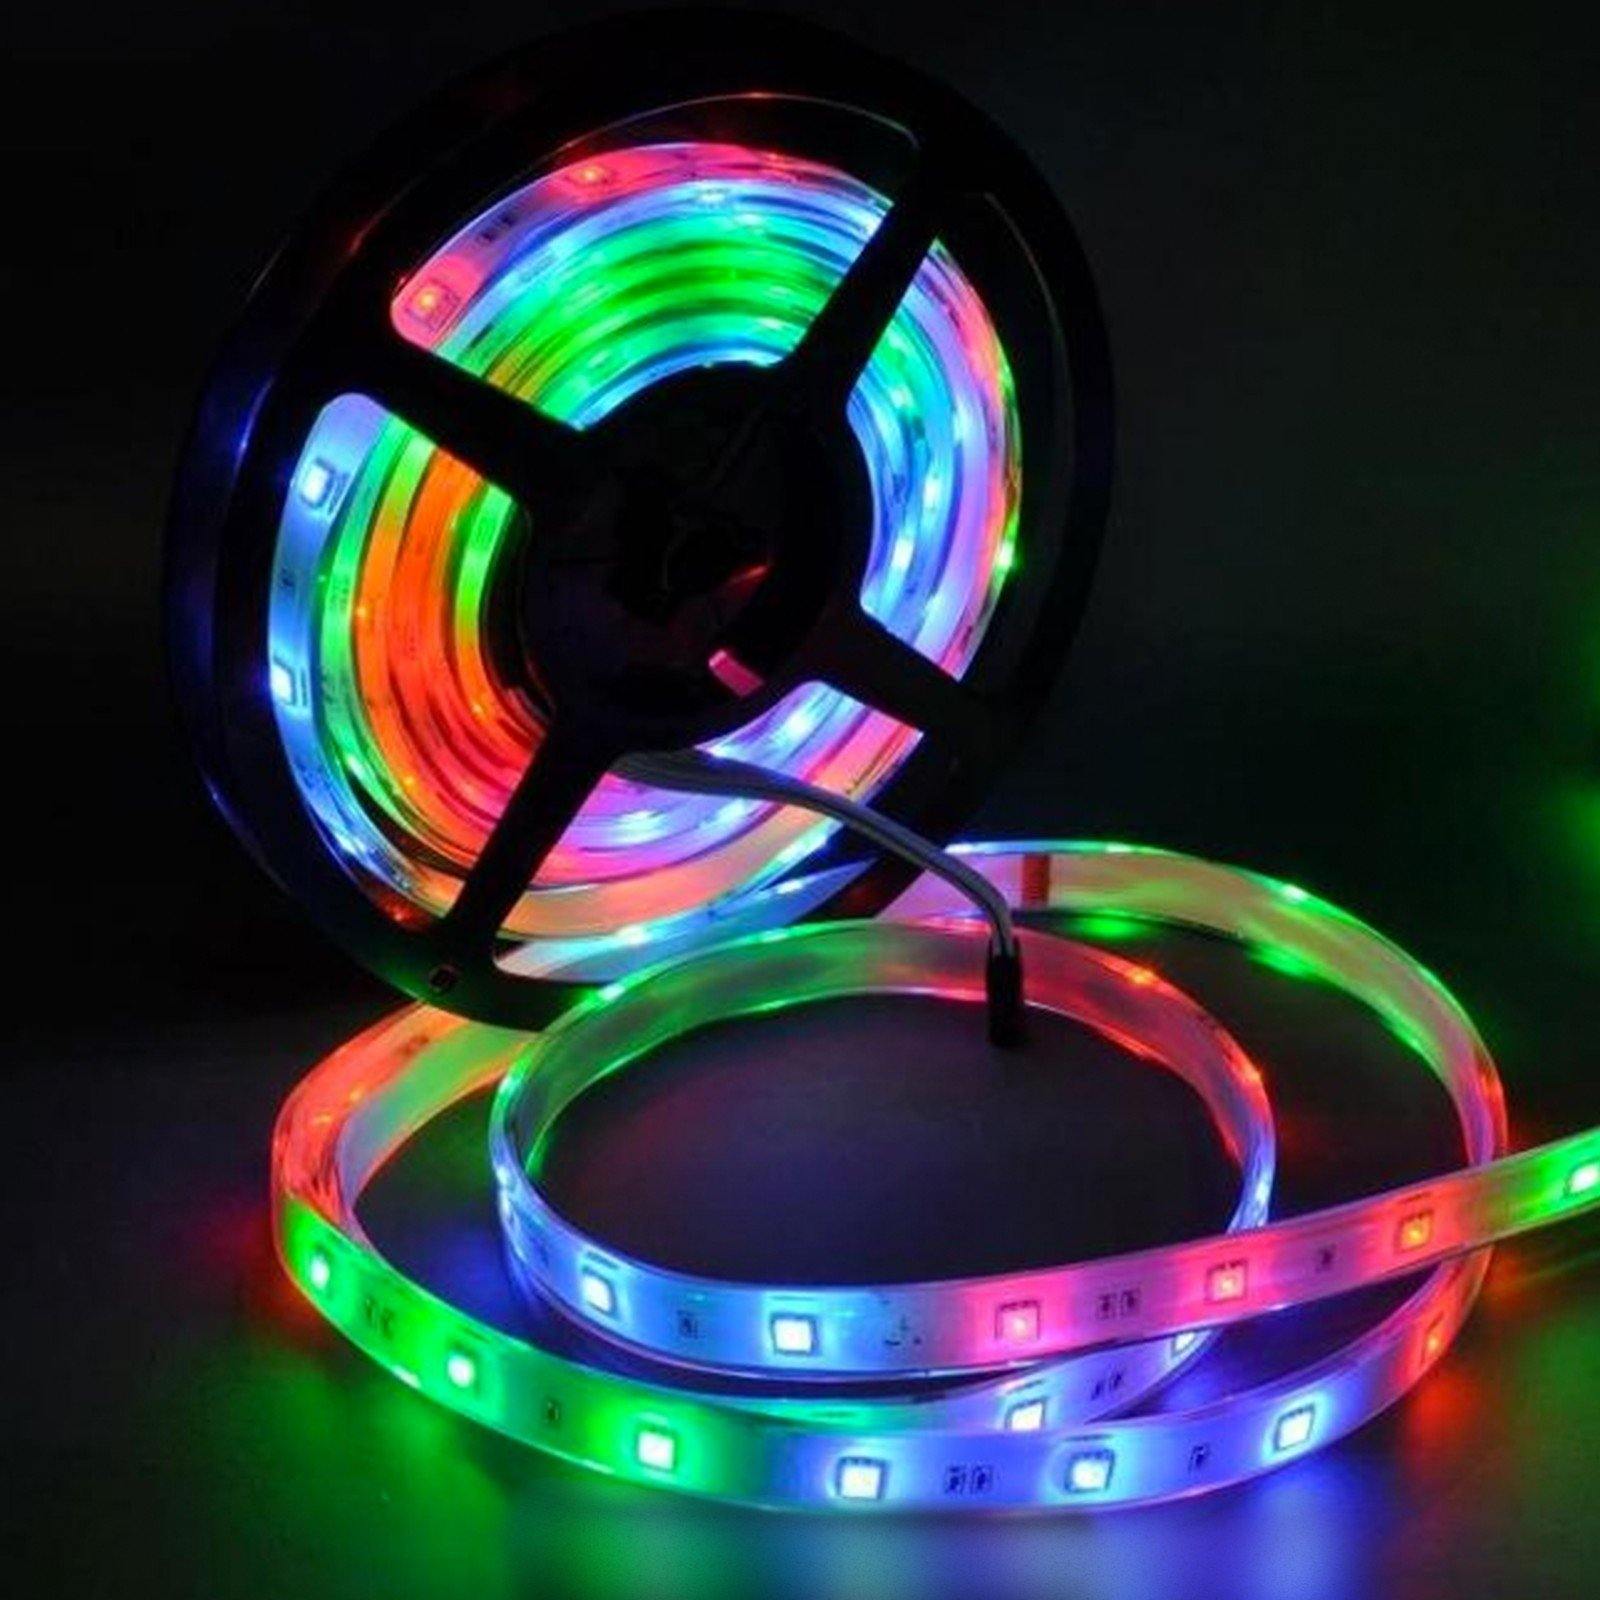 Outdoor Waterproof RGB Running Colour Changing Lighting Strip Kit with Remote 5m for Home Bedroom TV Kitchen, Ultra Bright DIY Decoration - ENER-J Smart Home